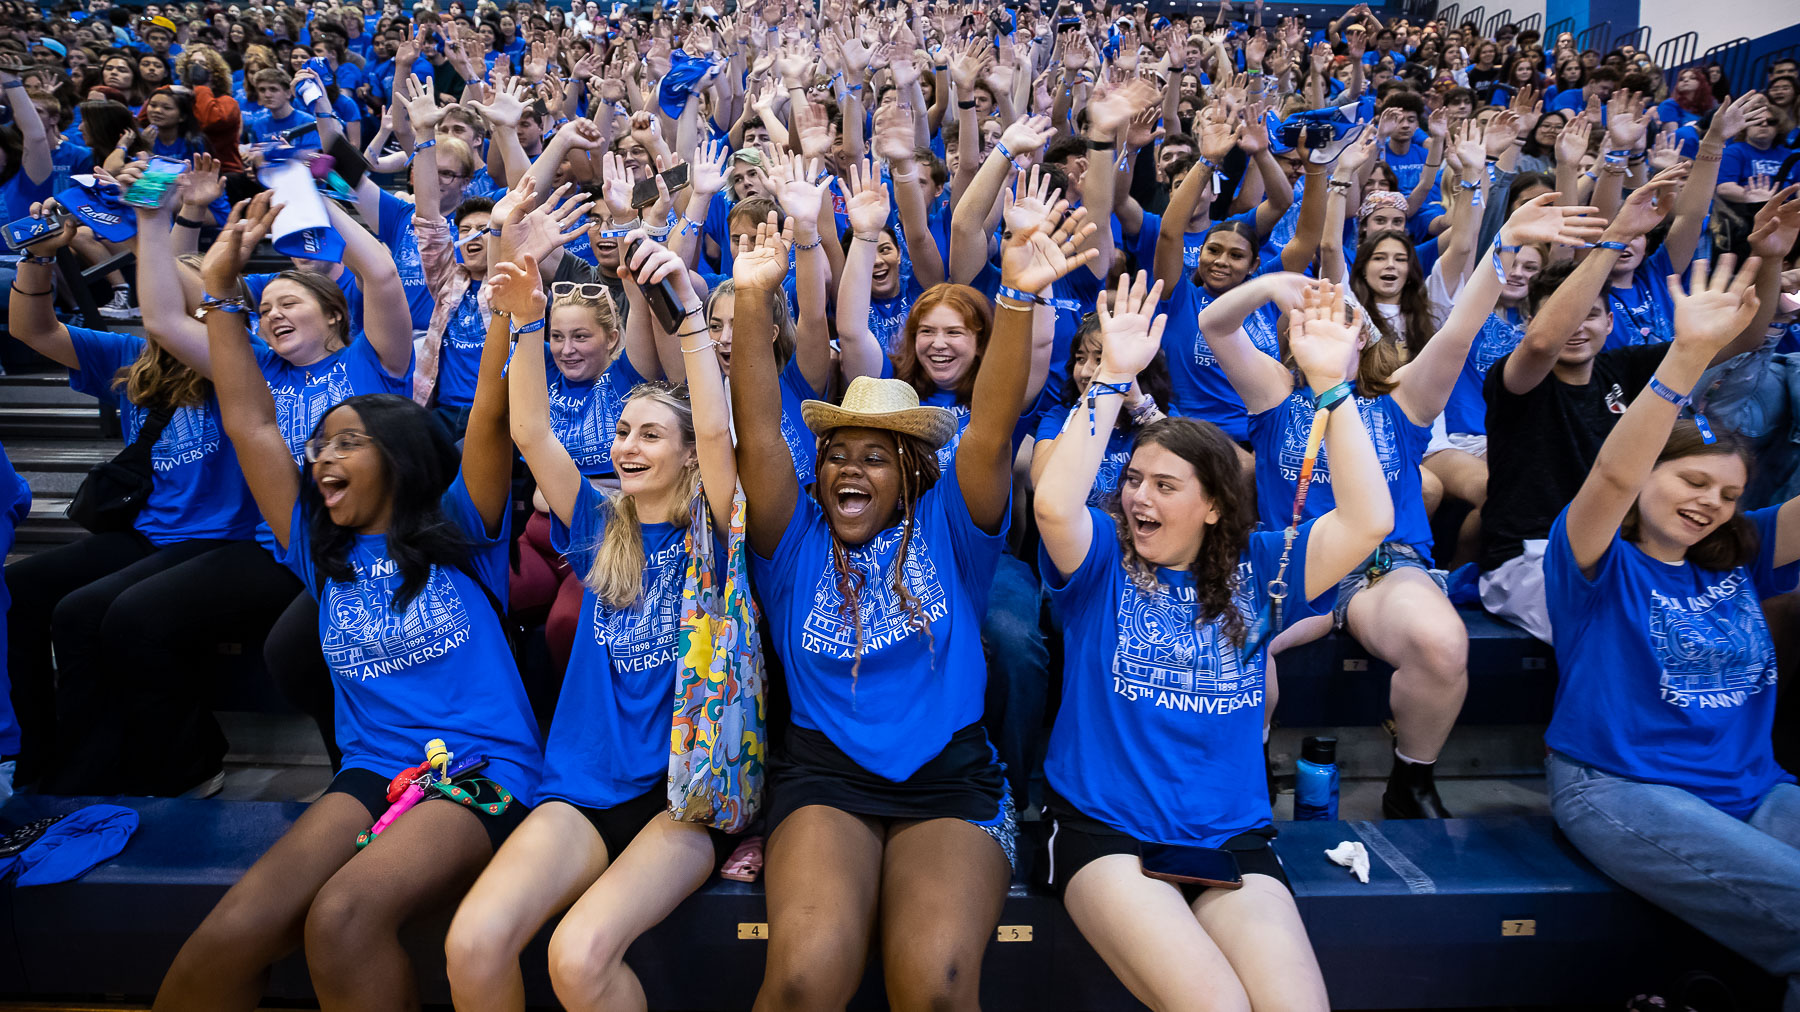 New students showed their excitement during the first Blue Demon Welcome held at the Lincoln Park Campus. (DePaul University/Jeff Carrion)